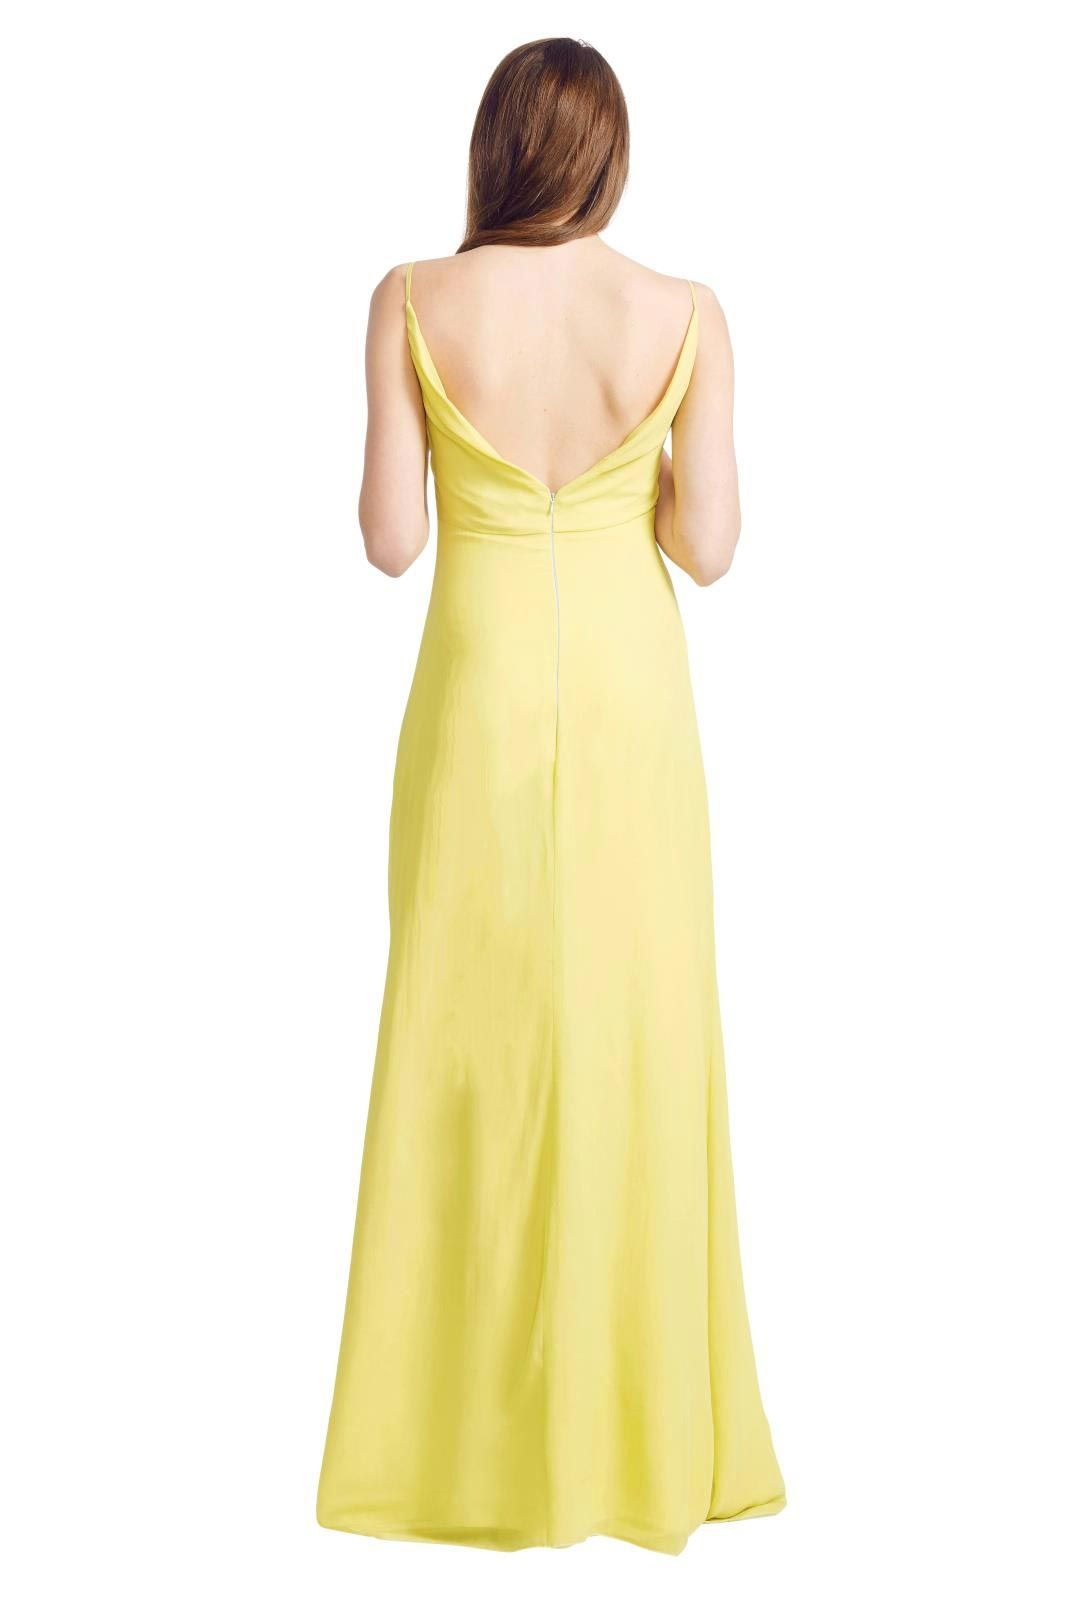 Ae'lkemi - Cowl Front Gown - Yellow - Back